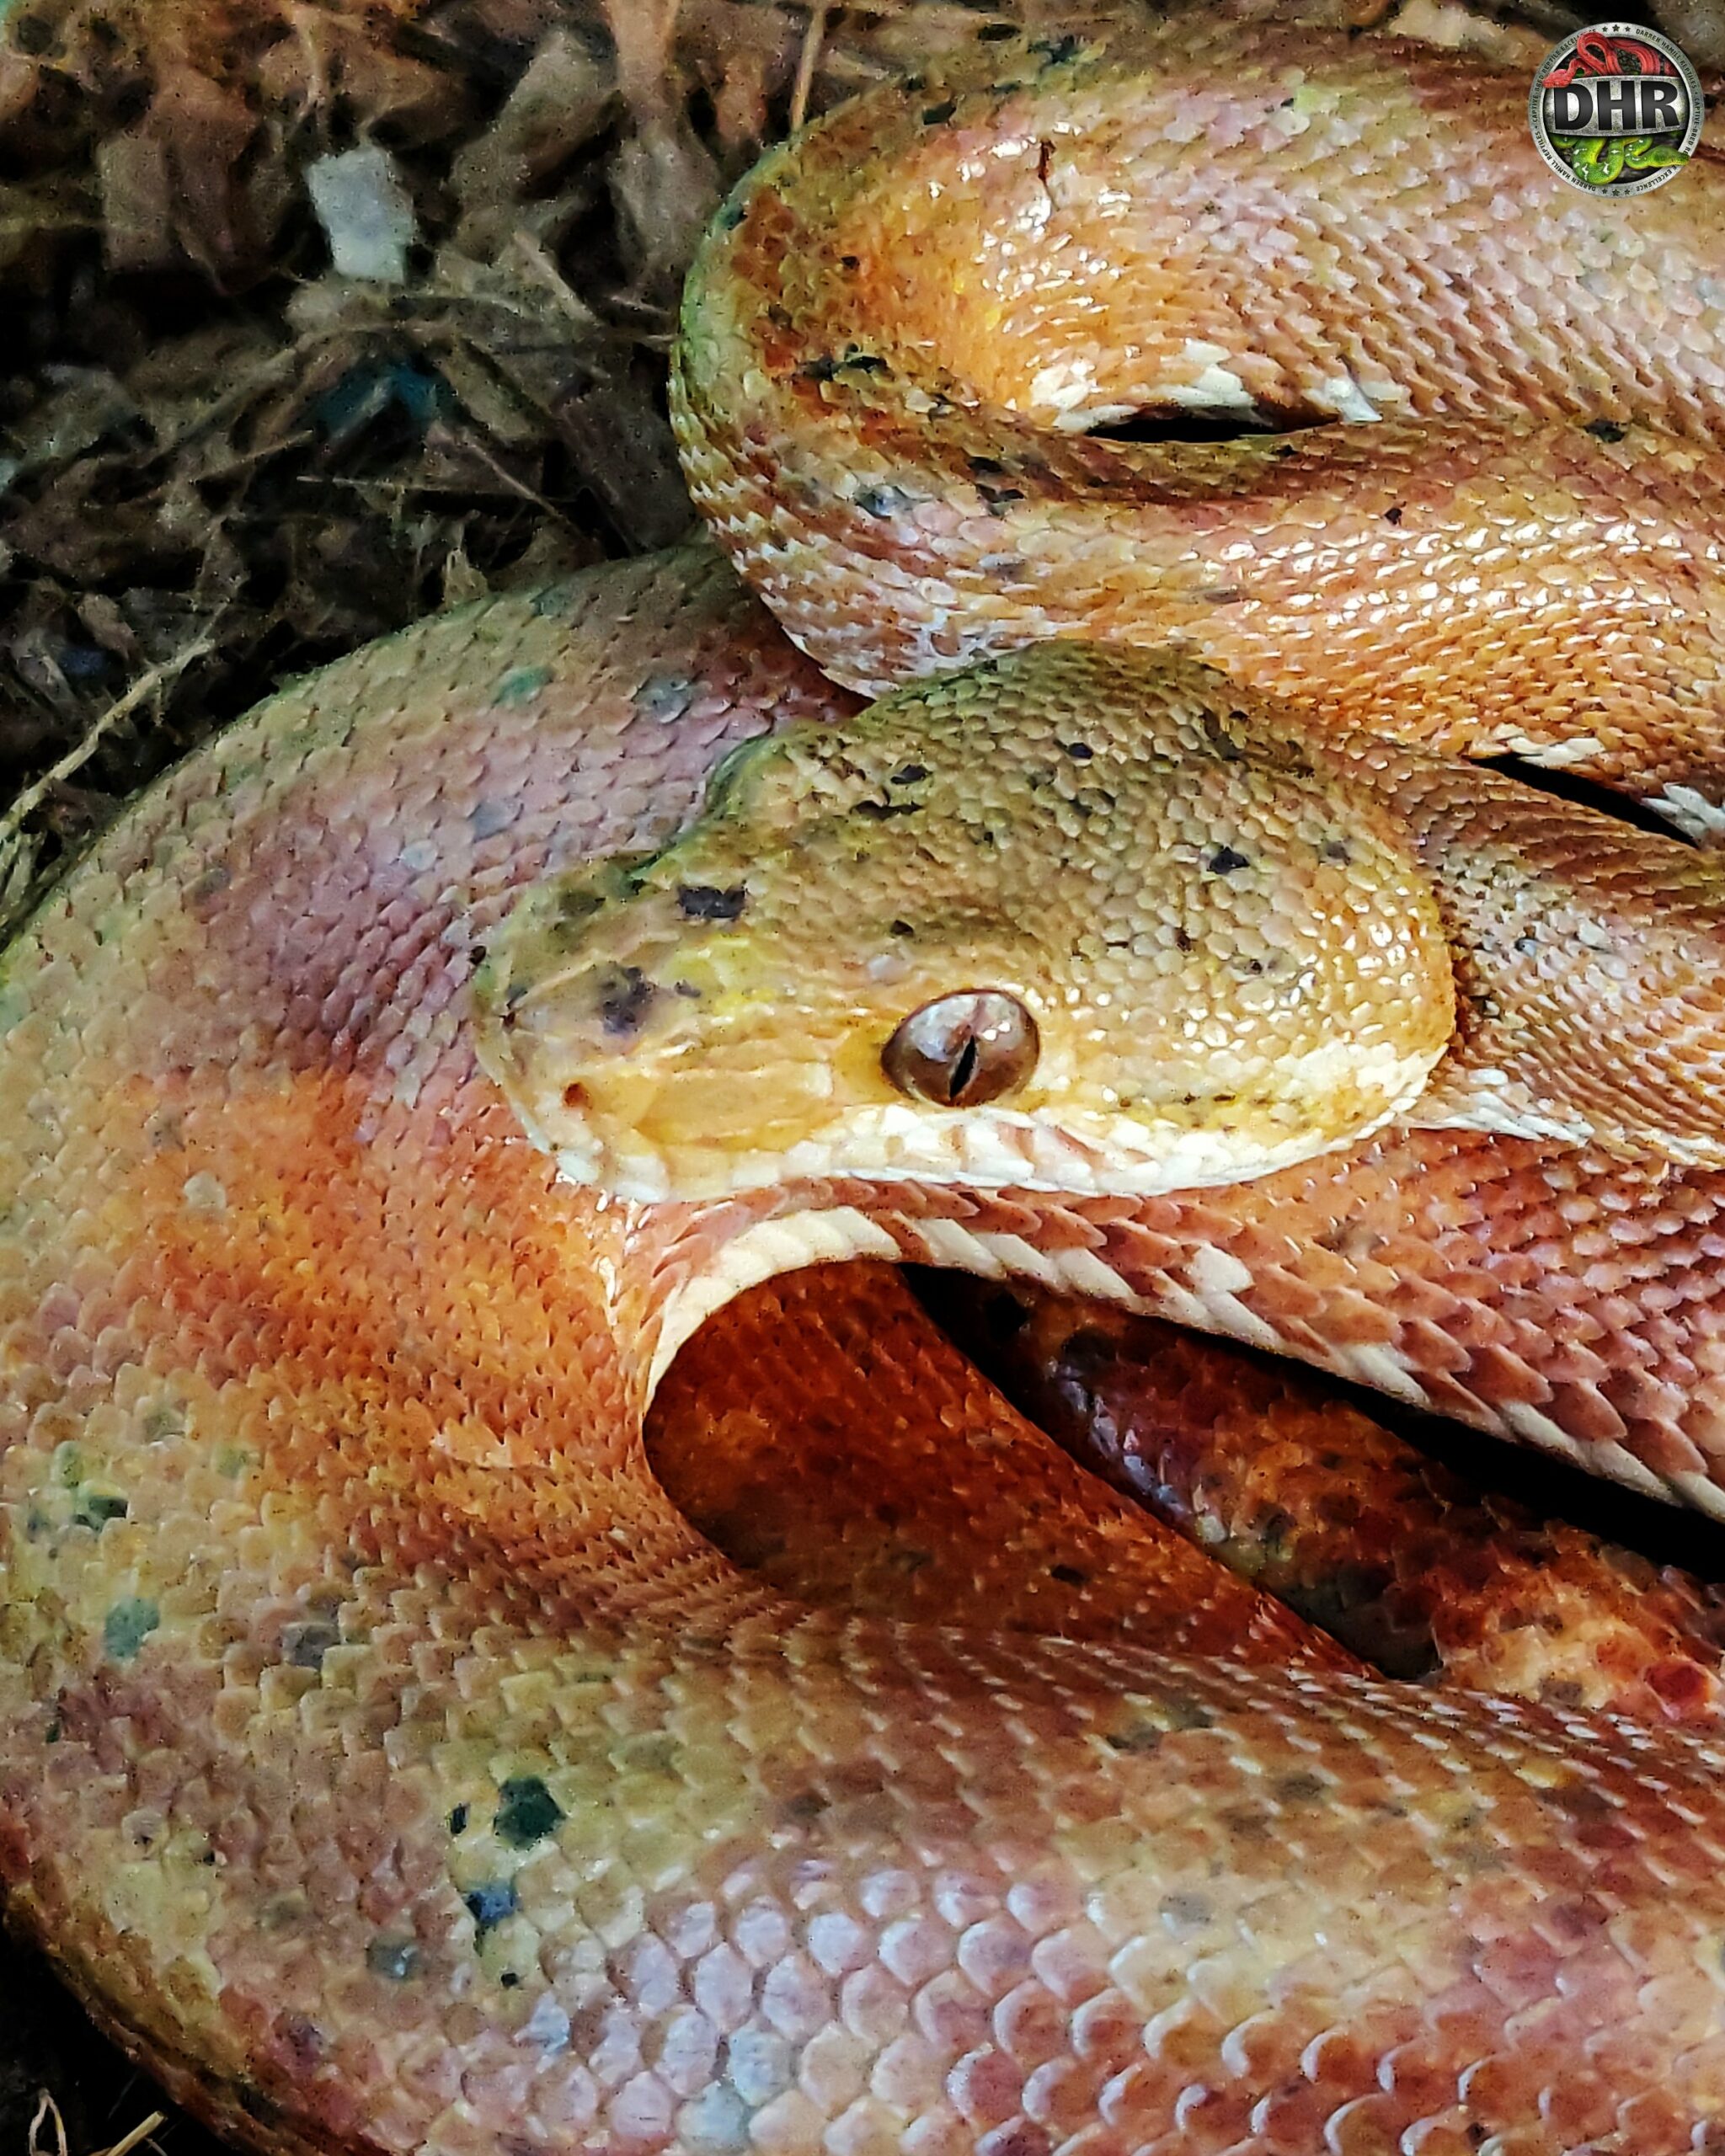 One of our adult male Amazon Tree Boas